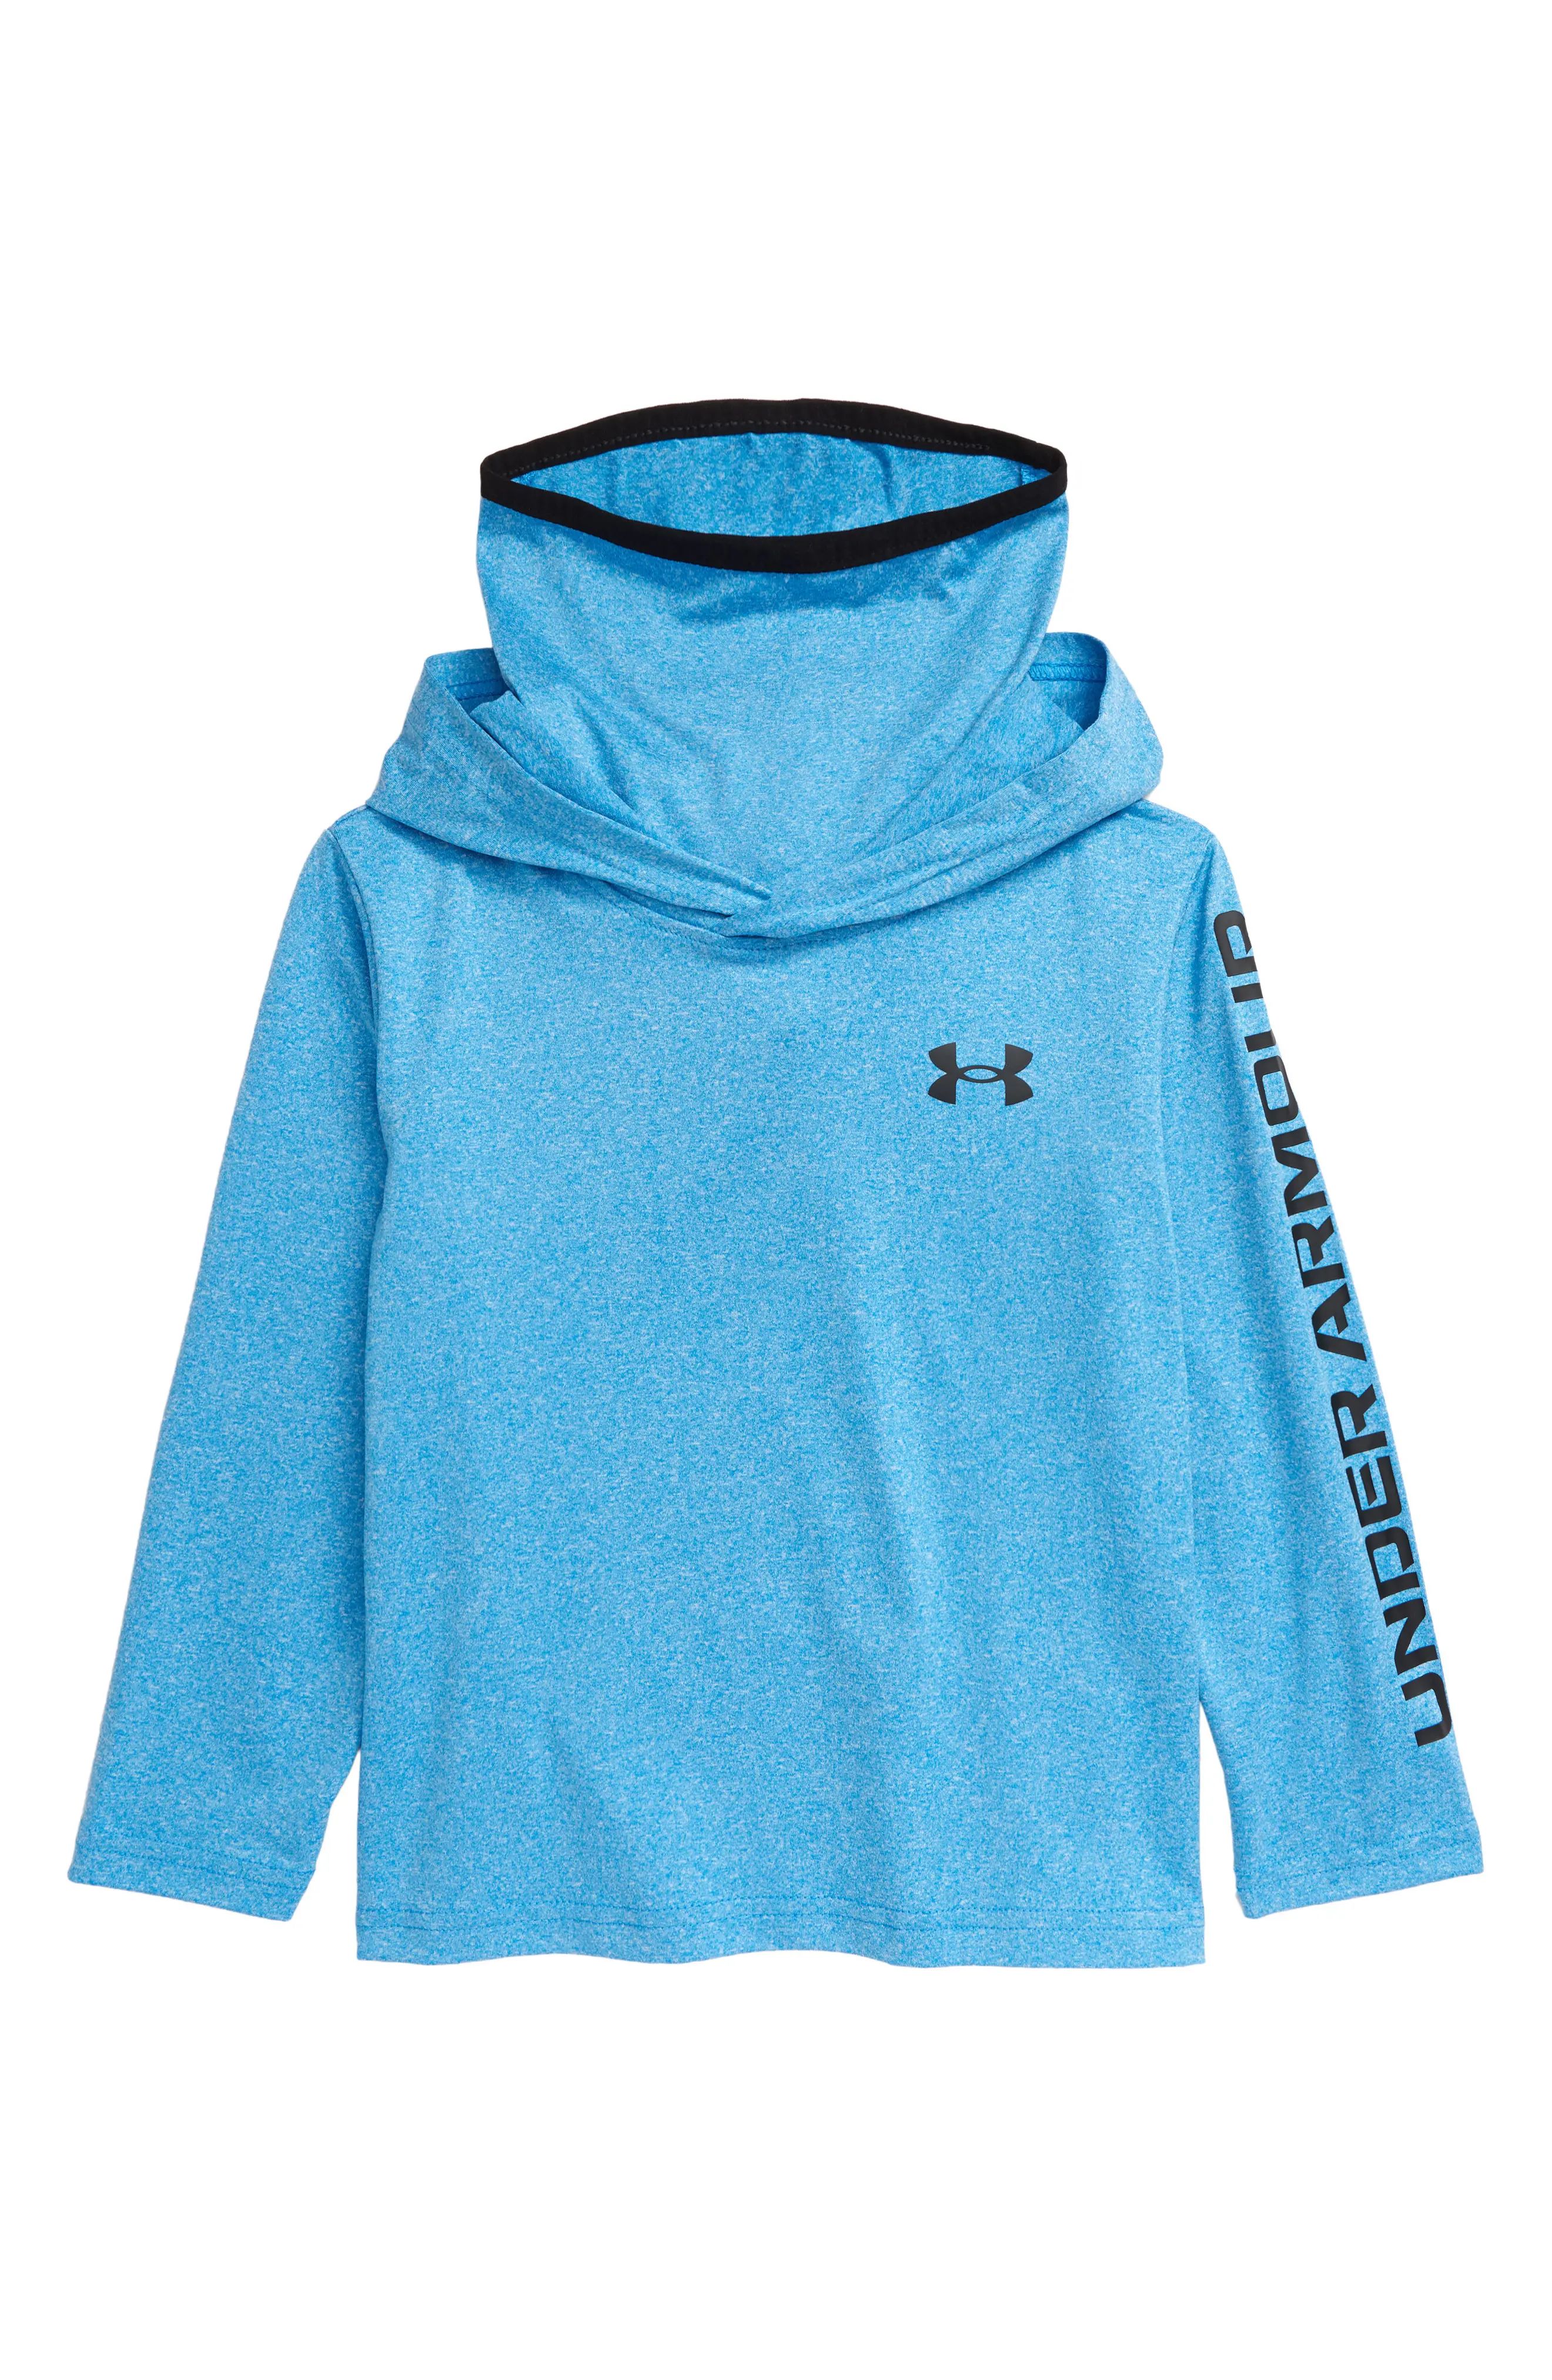 Toddler Boy's Under Armour Kids' Twist Extended Funnel Neck Hoodie, Size 2T - Blue | Nordstrom